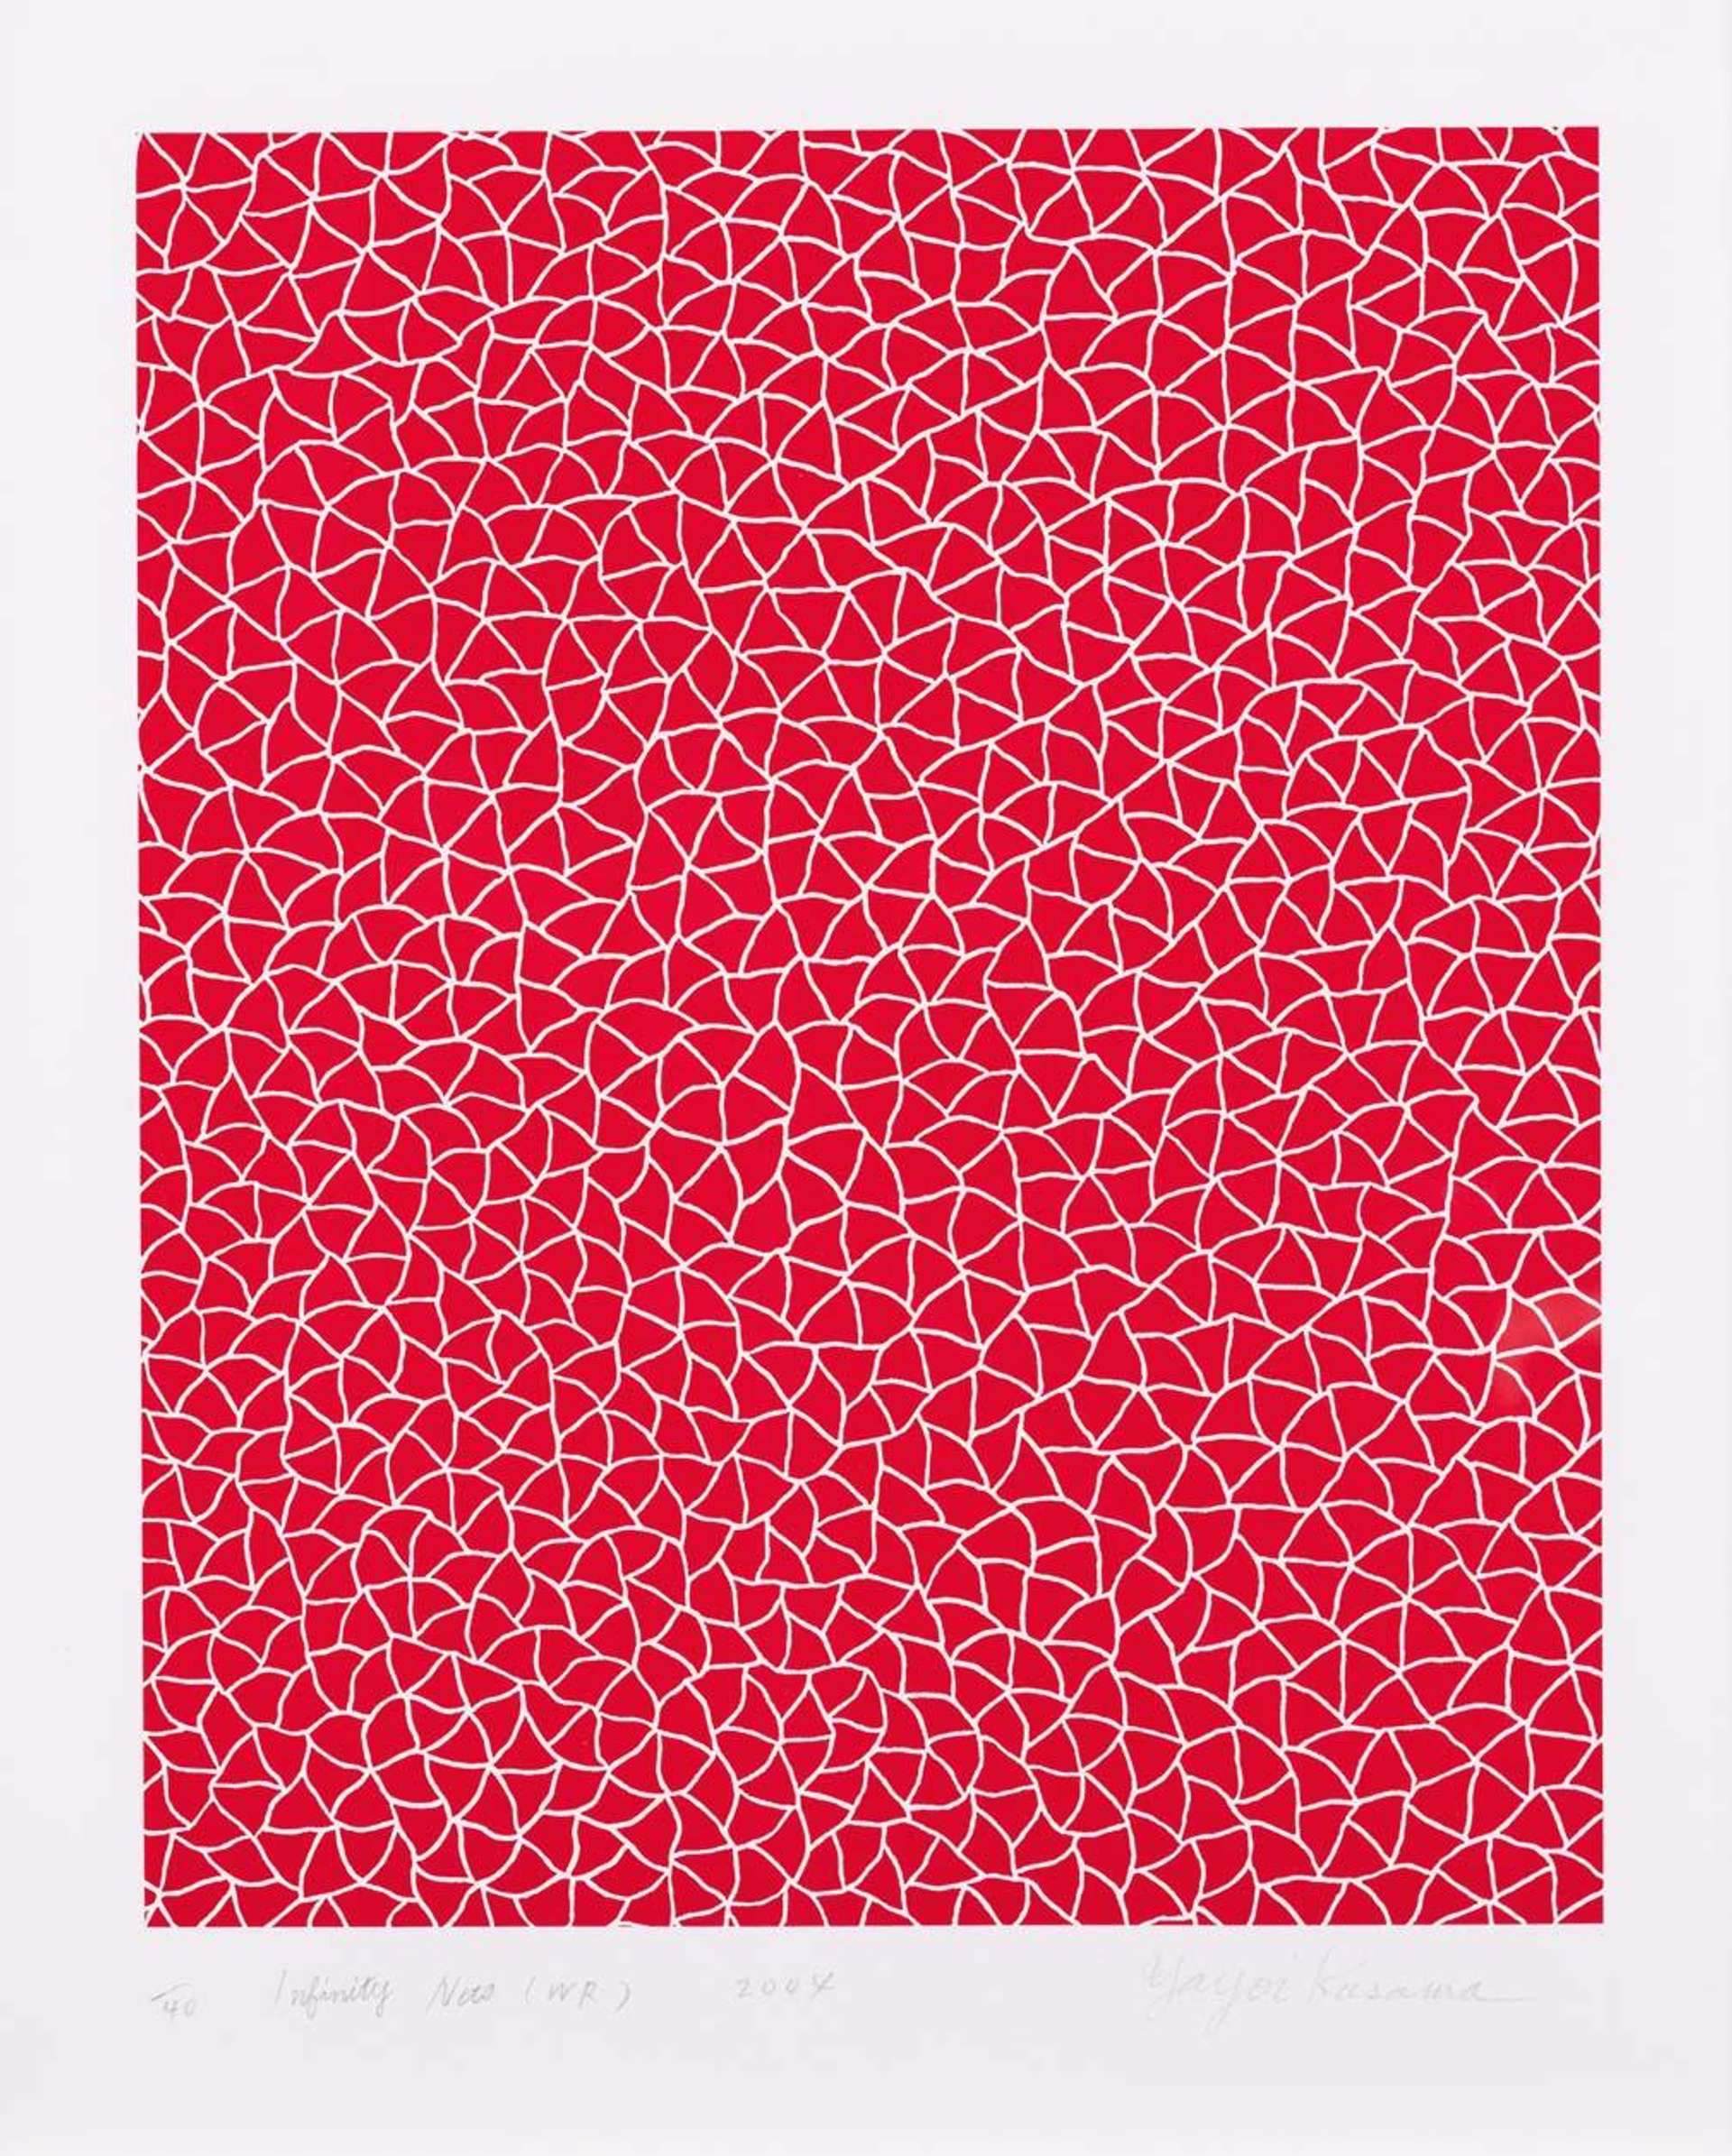 A screenprint featuring white lines cutting through a red background, forming many loose triangle shapes.